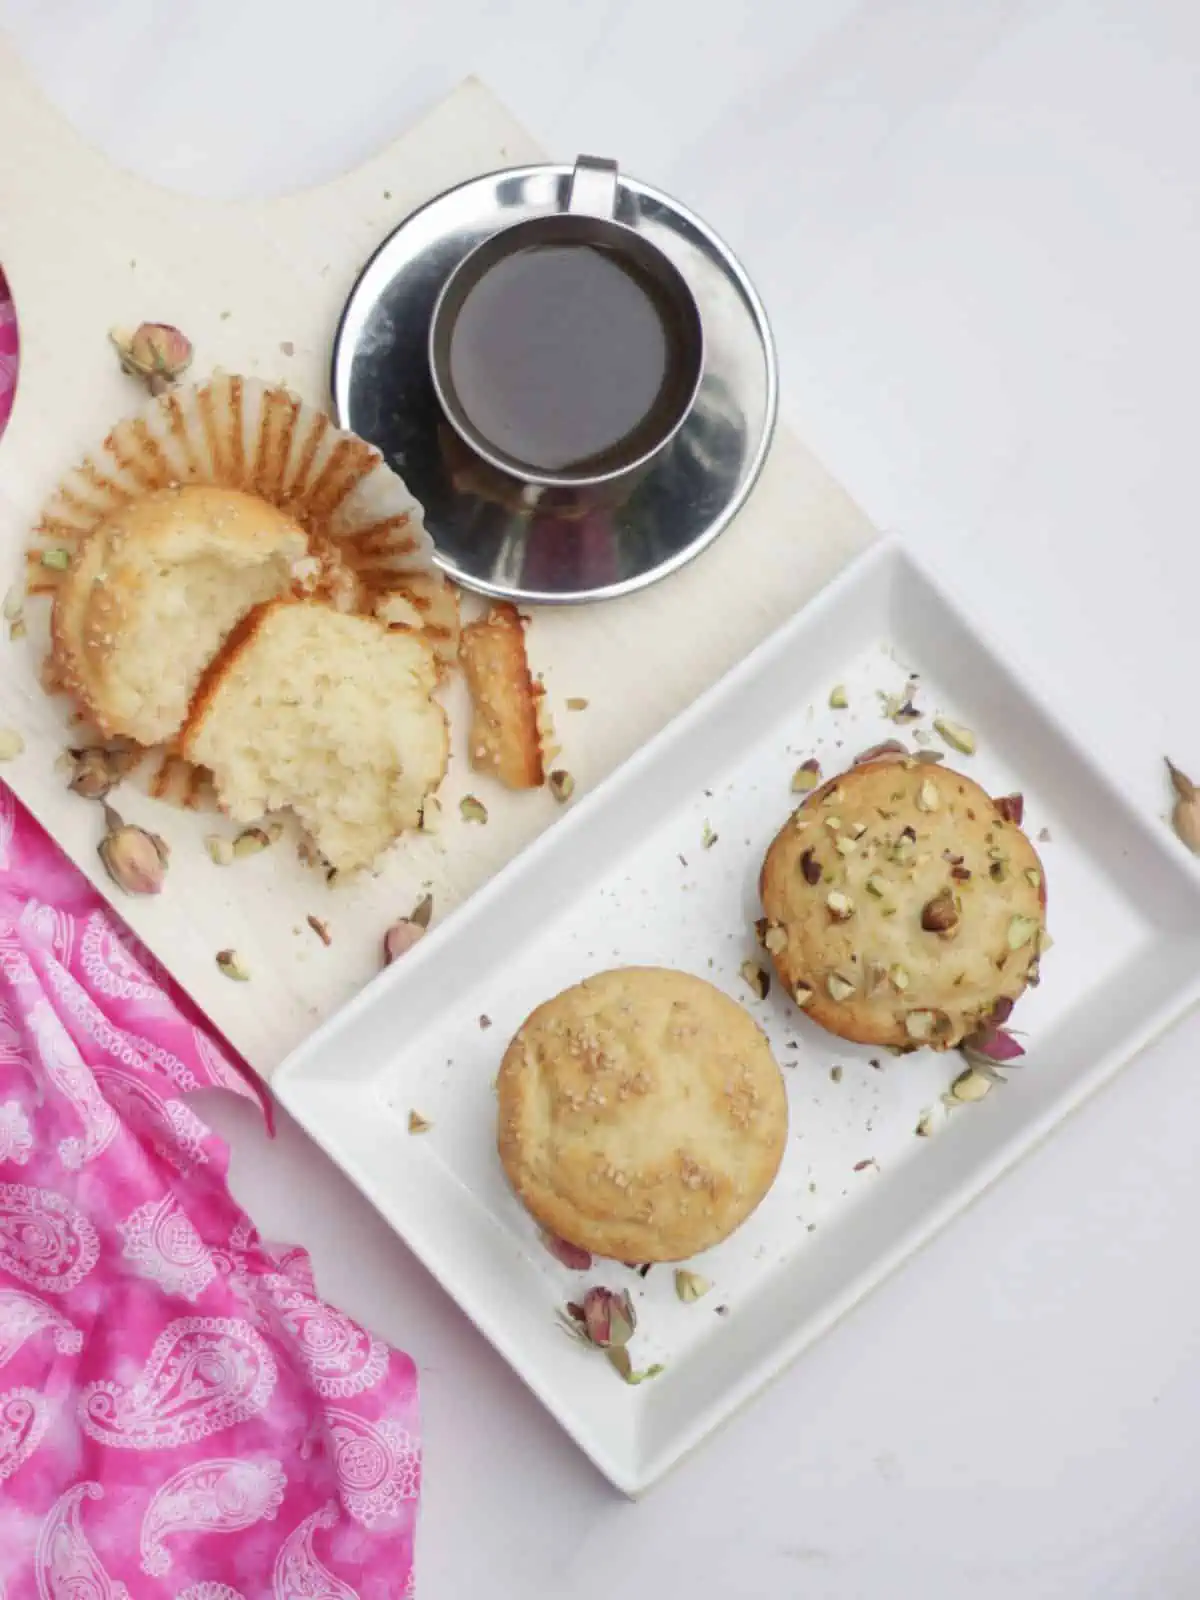 Muffins in a plate and one sliced open with coffee on side.